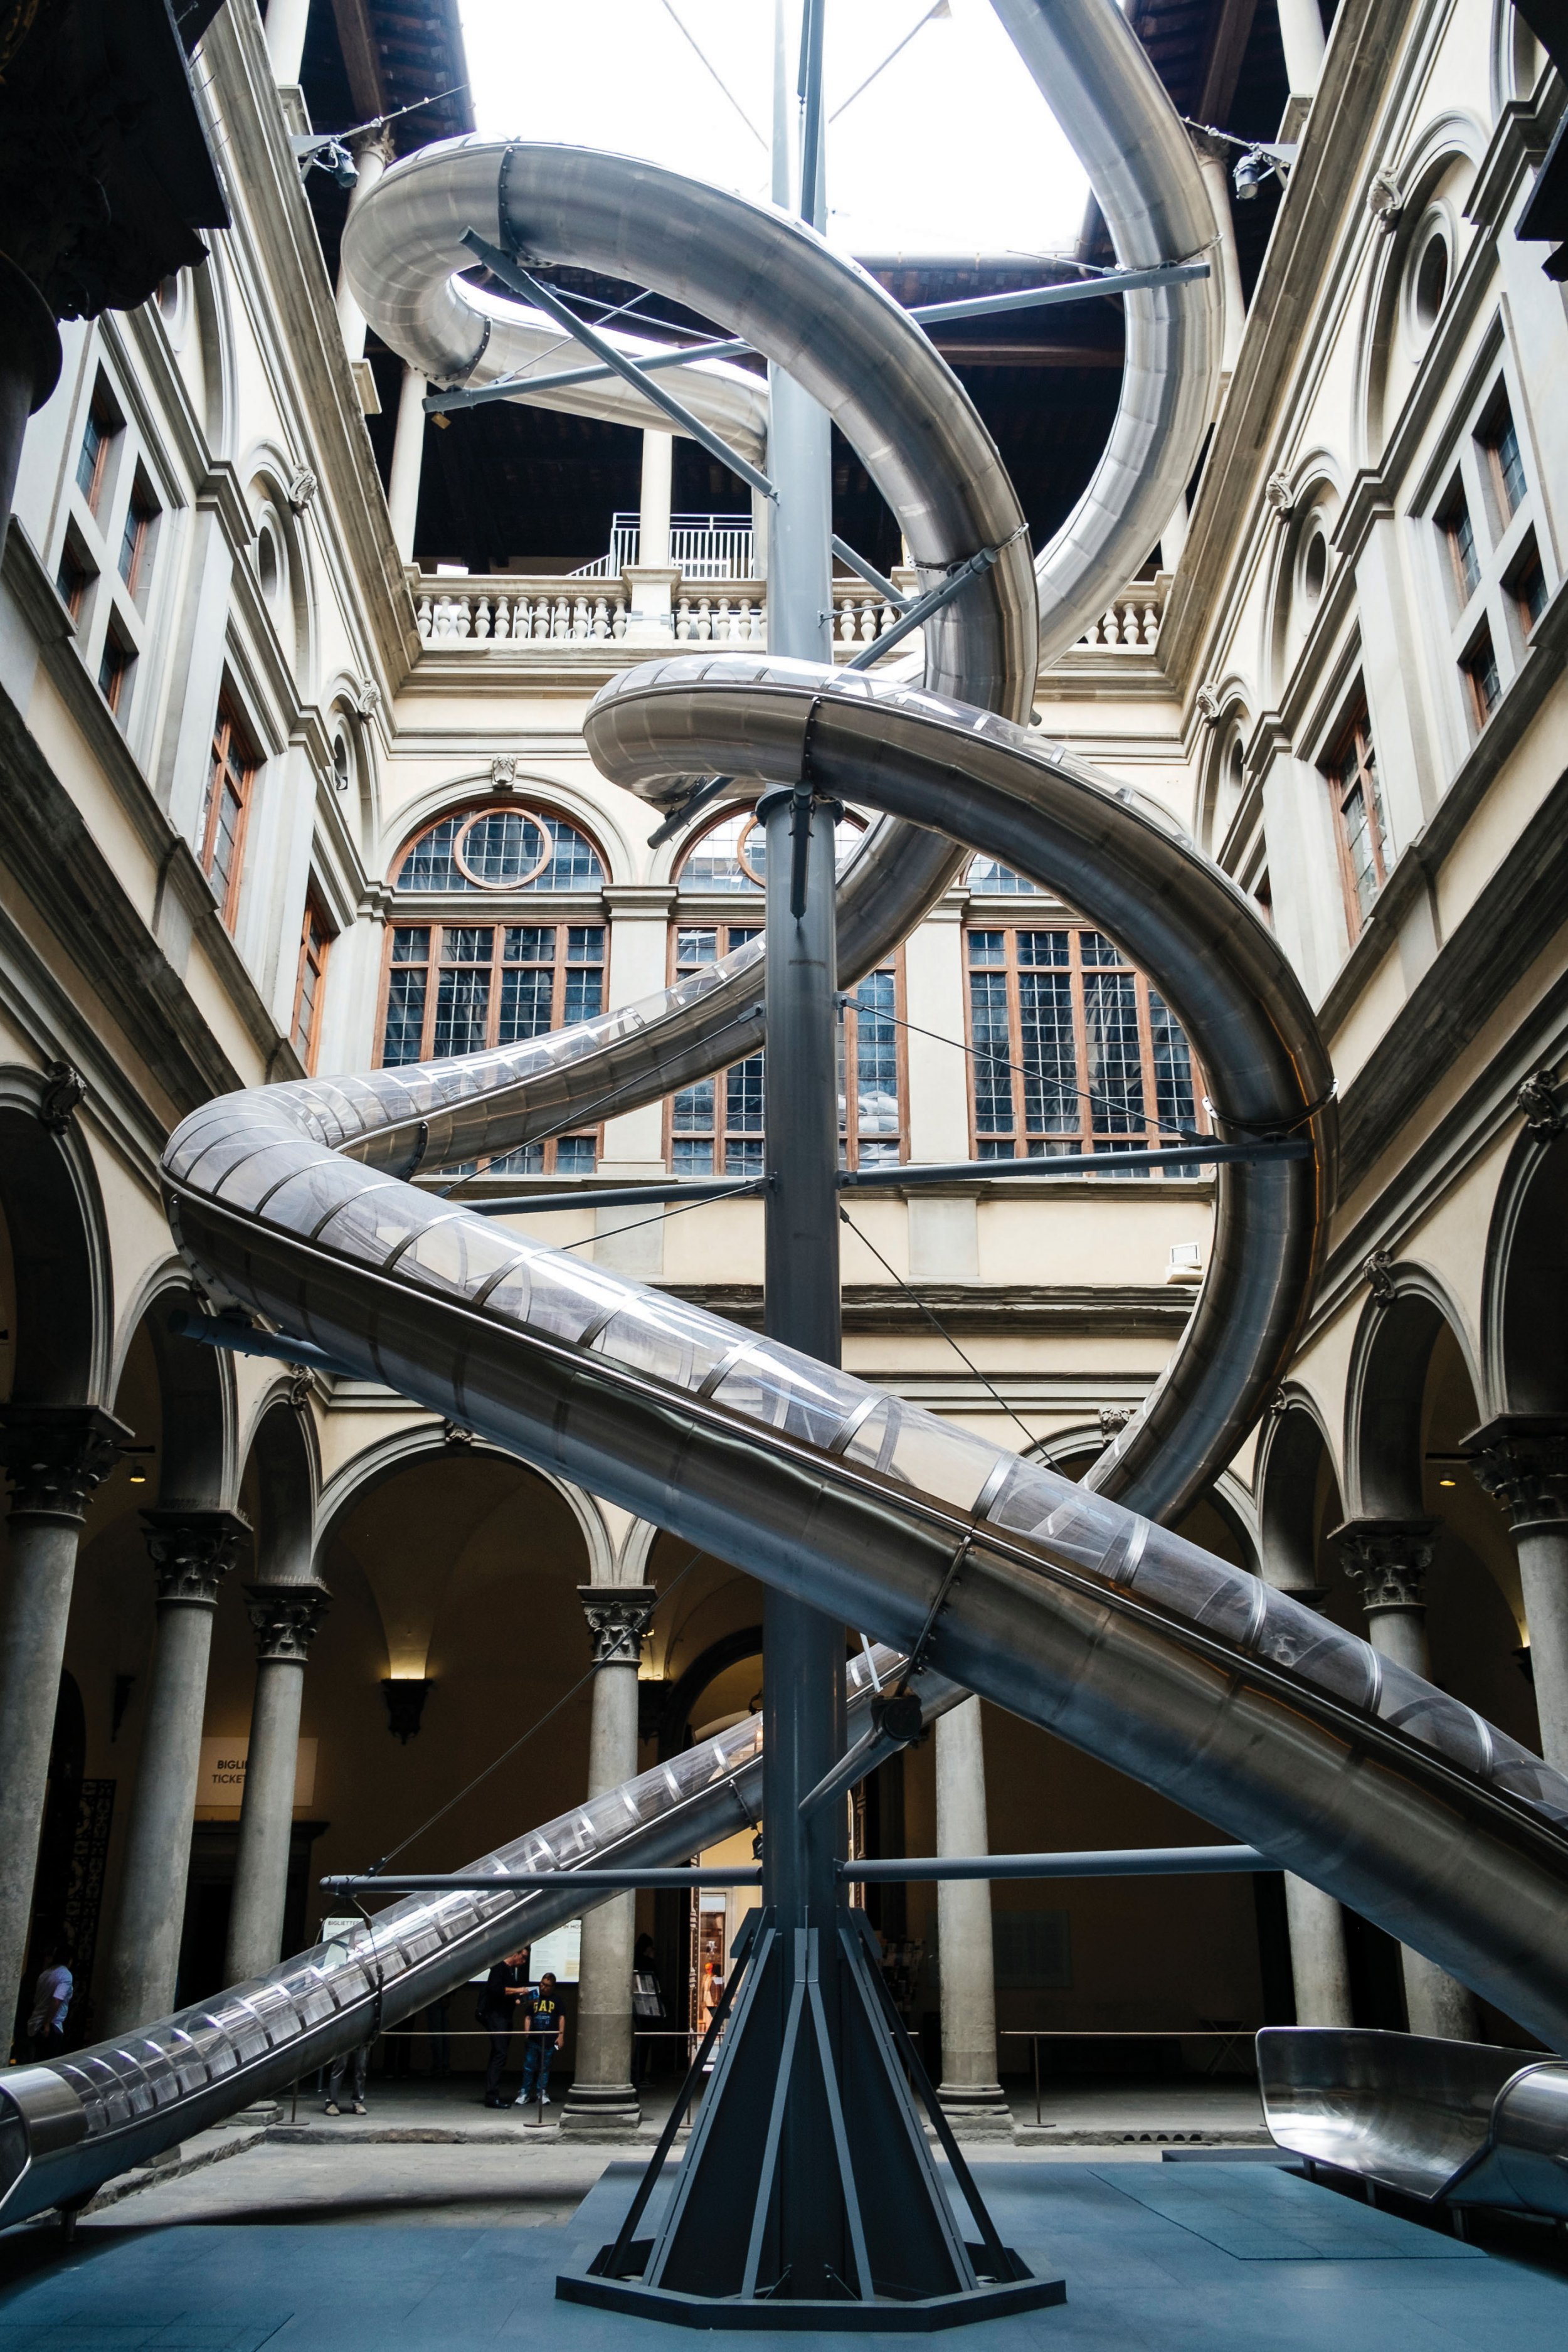 Carsten Höller's slides: A fun way to experience museums